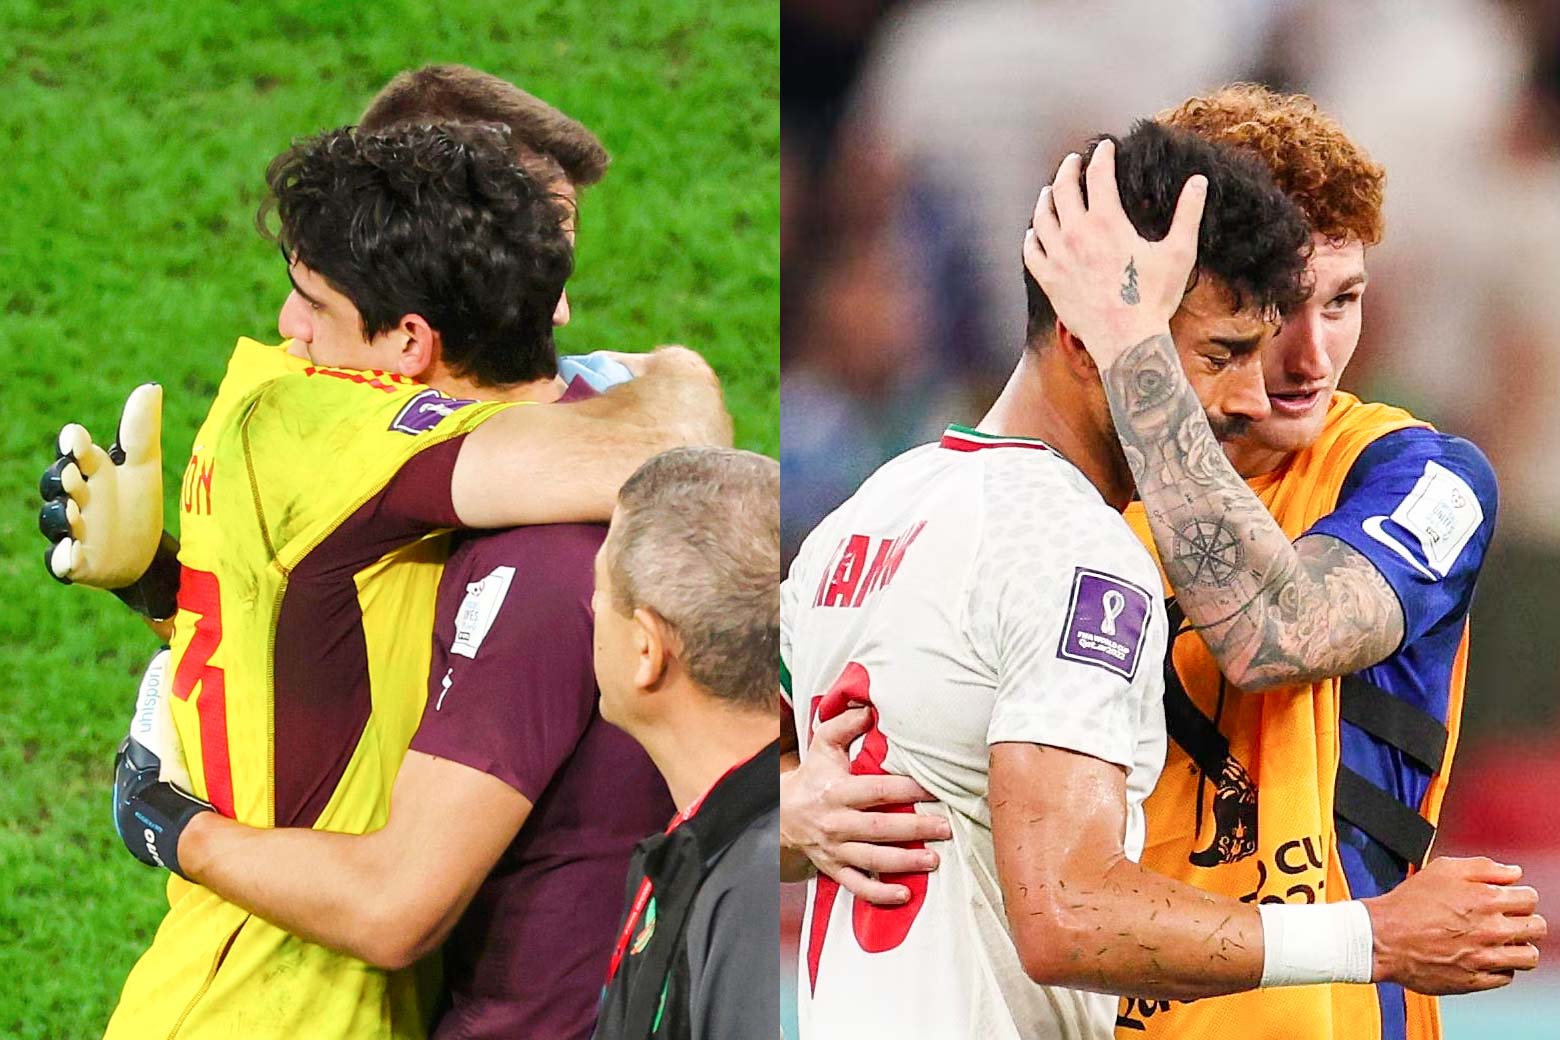 A collage of two images, from L-R: Yassine Bounou and Unai Simon hug and clap each other on the back. Josh Sargent hugs a crying Ramin Rezaeian and cups his head.